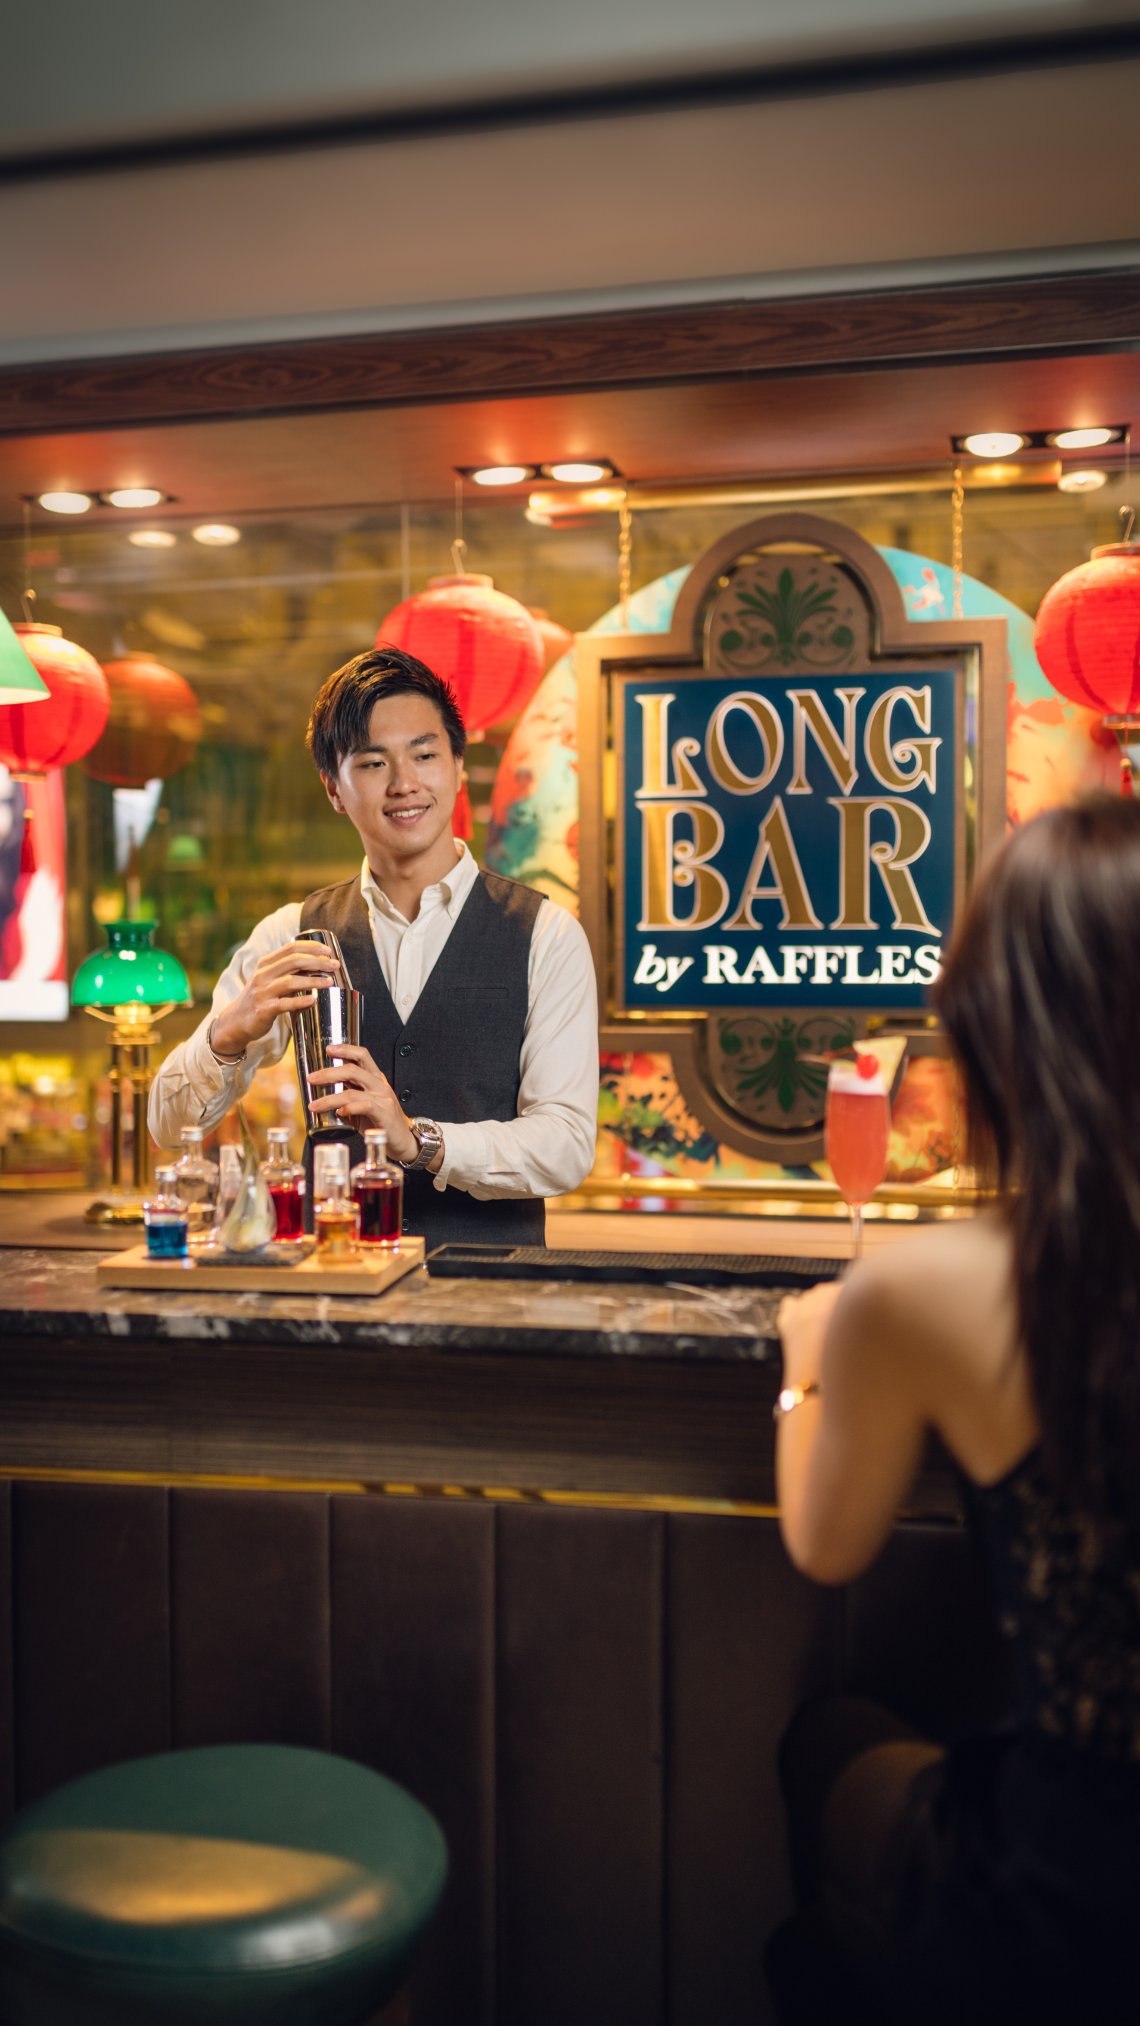 A bartender shaking a cocktail for a customer